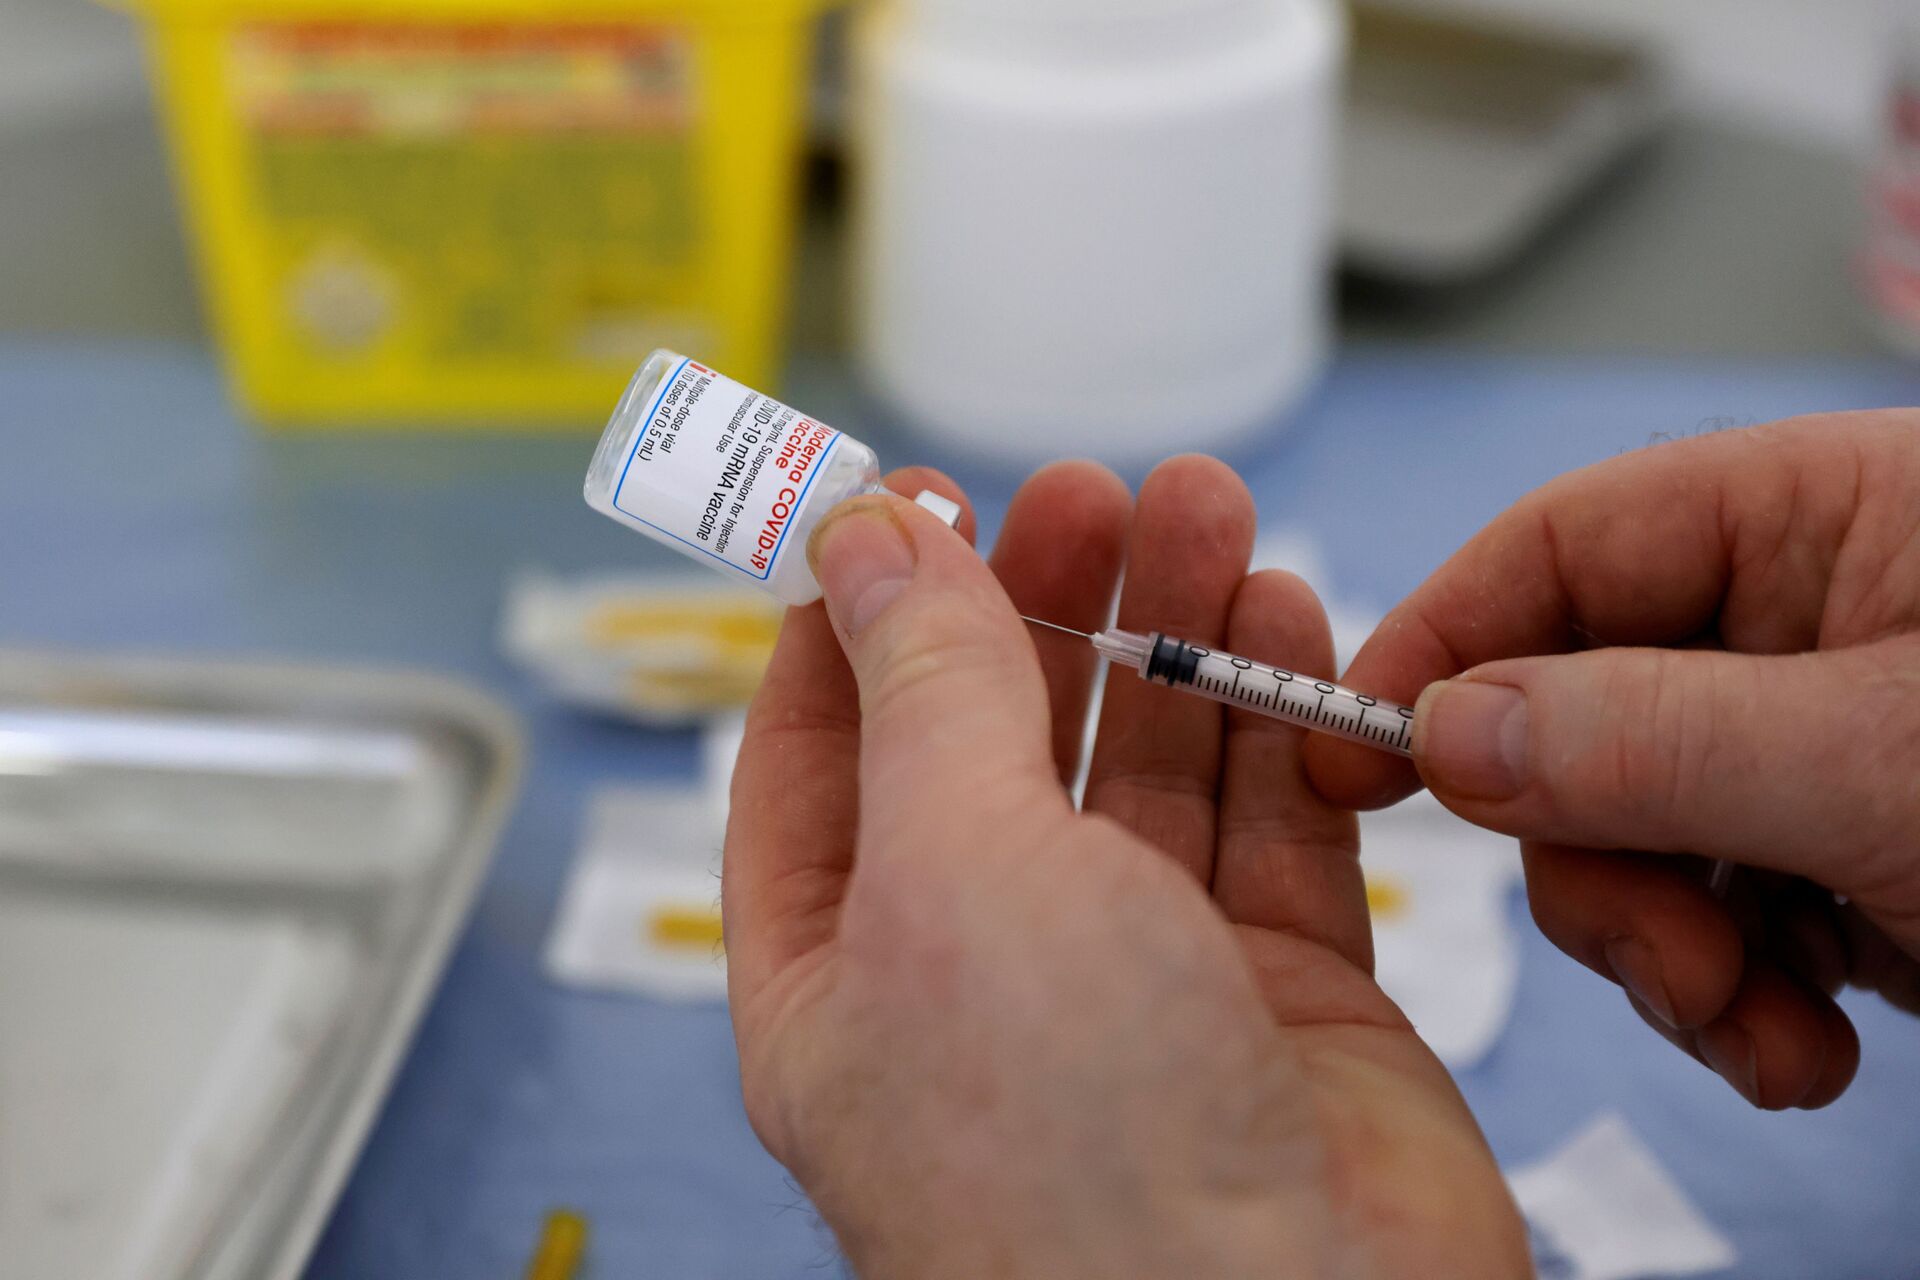 FILE PHOTO: A health worker prepares a syringe with a dose of the Moderna COVID-19 vaccine at a vaccination center in Calais as part of the coronavirus disease (COVID-19) vaccination campaign in France, March 4, 2021. - Sputnik International, 1920, 07.09.2021